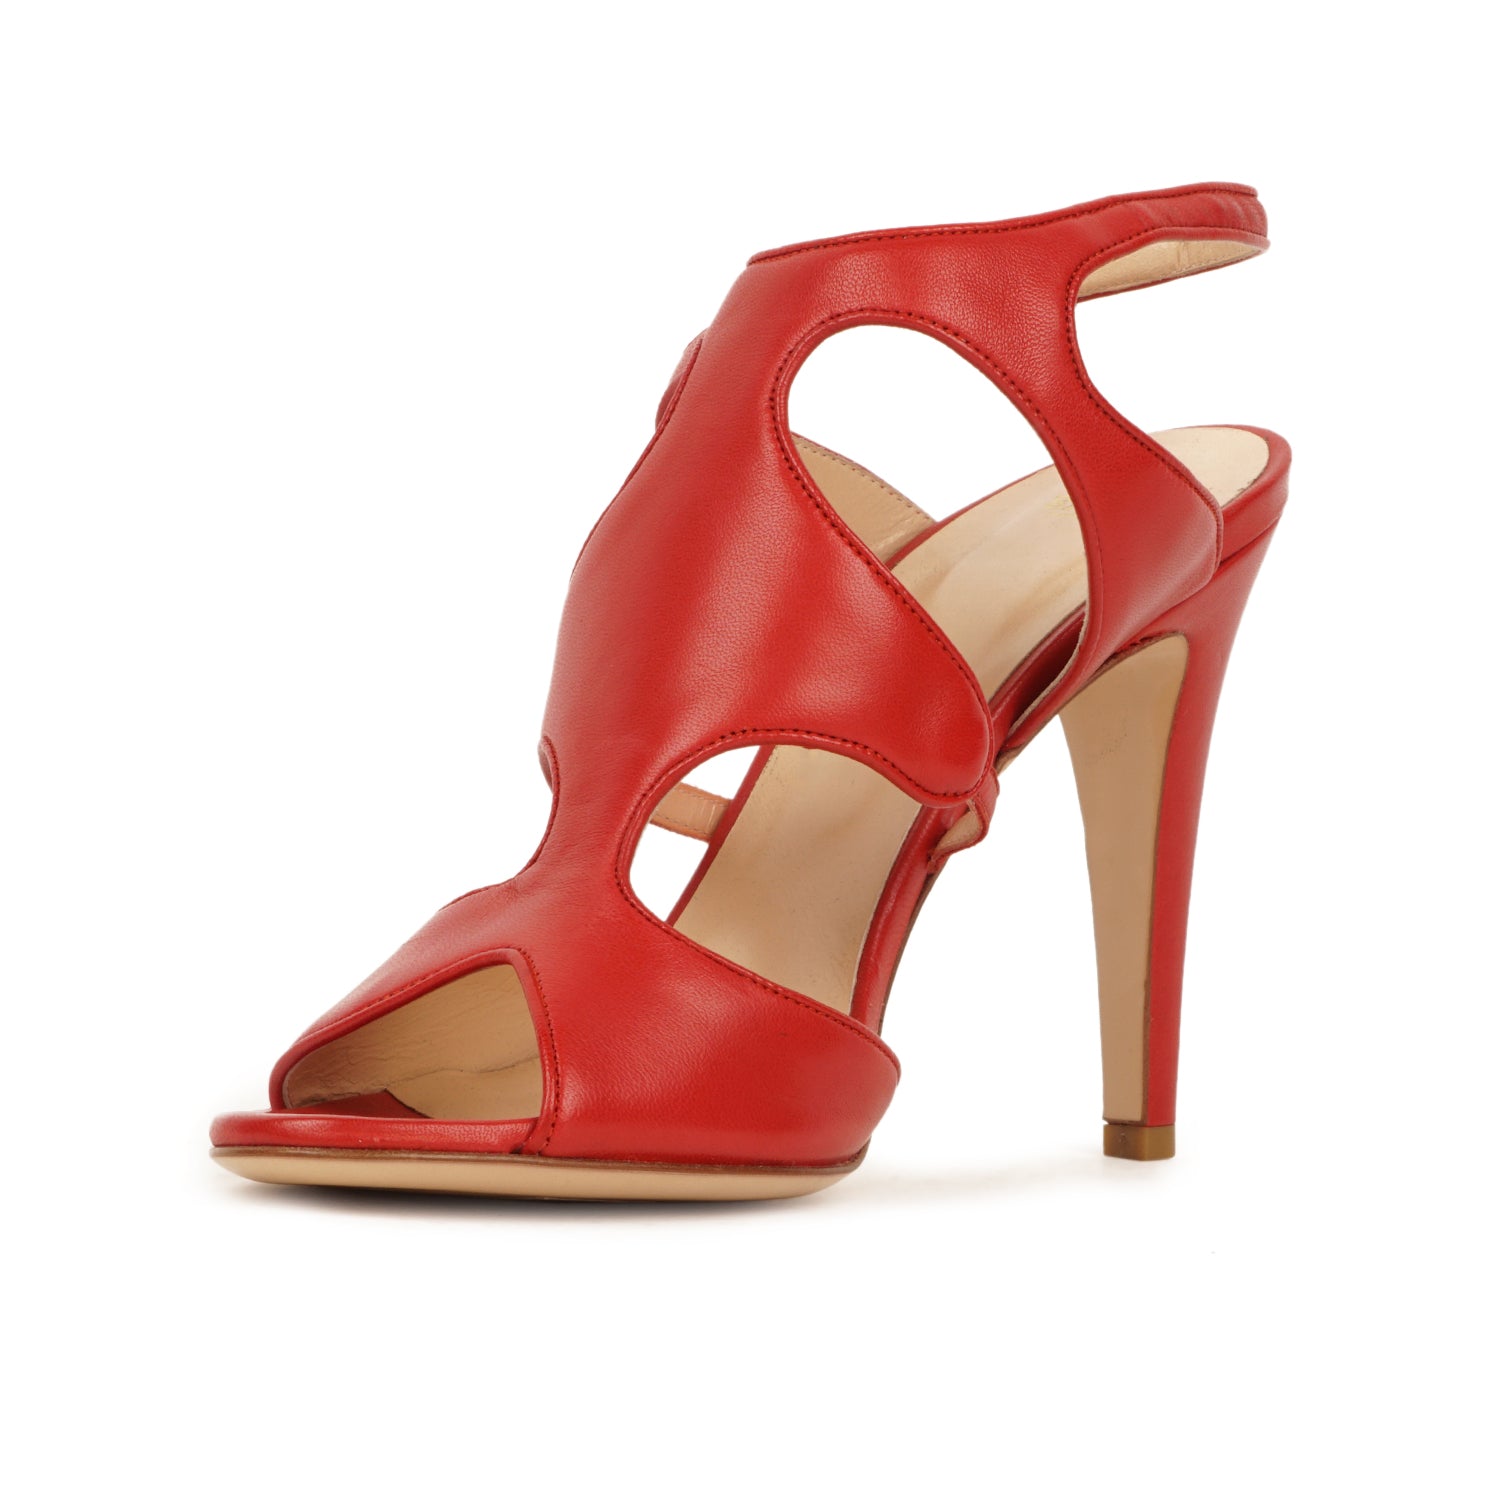 BALLY RED PUMPS